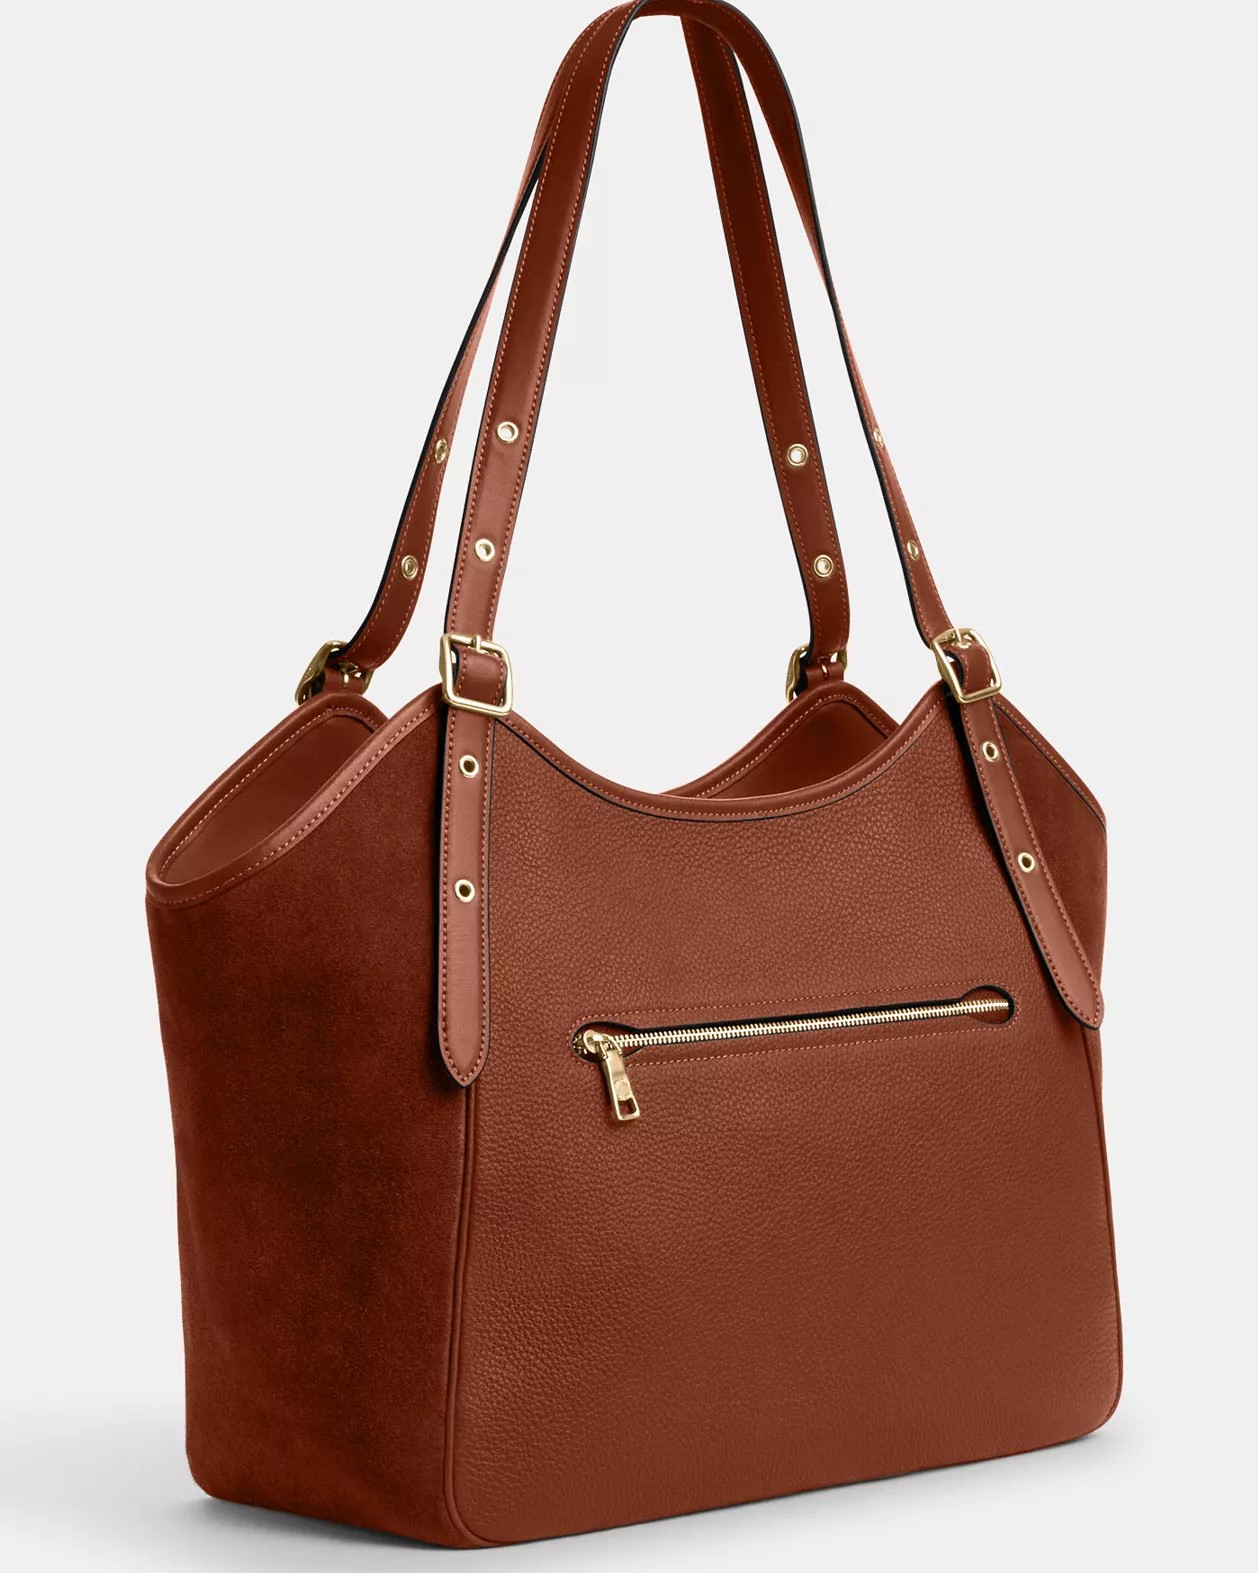 TÚI XÁCH NỮ COACH MEADOW SHOULDER BAG SUEDE AND REFINED PEBBLE LEATHER REDWOOD CM075 5